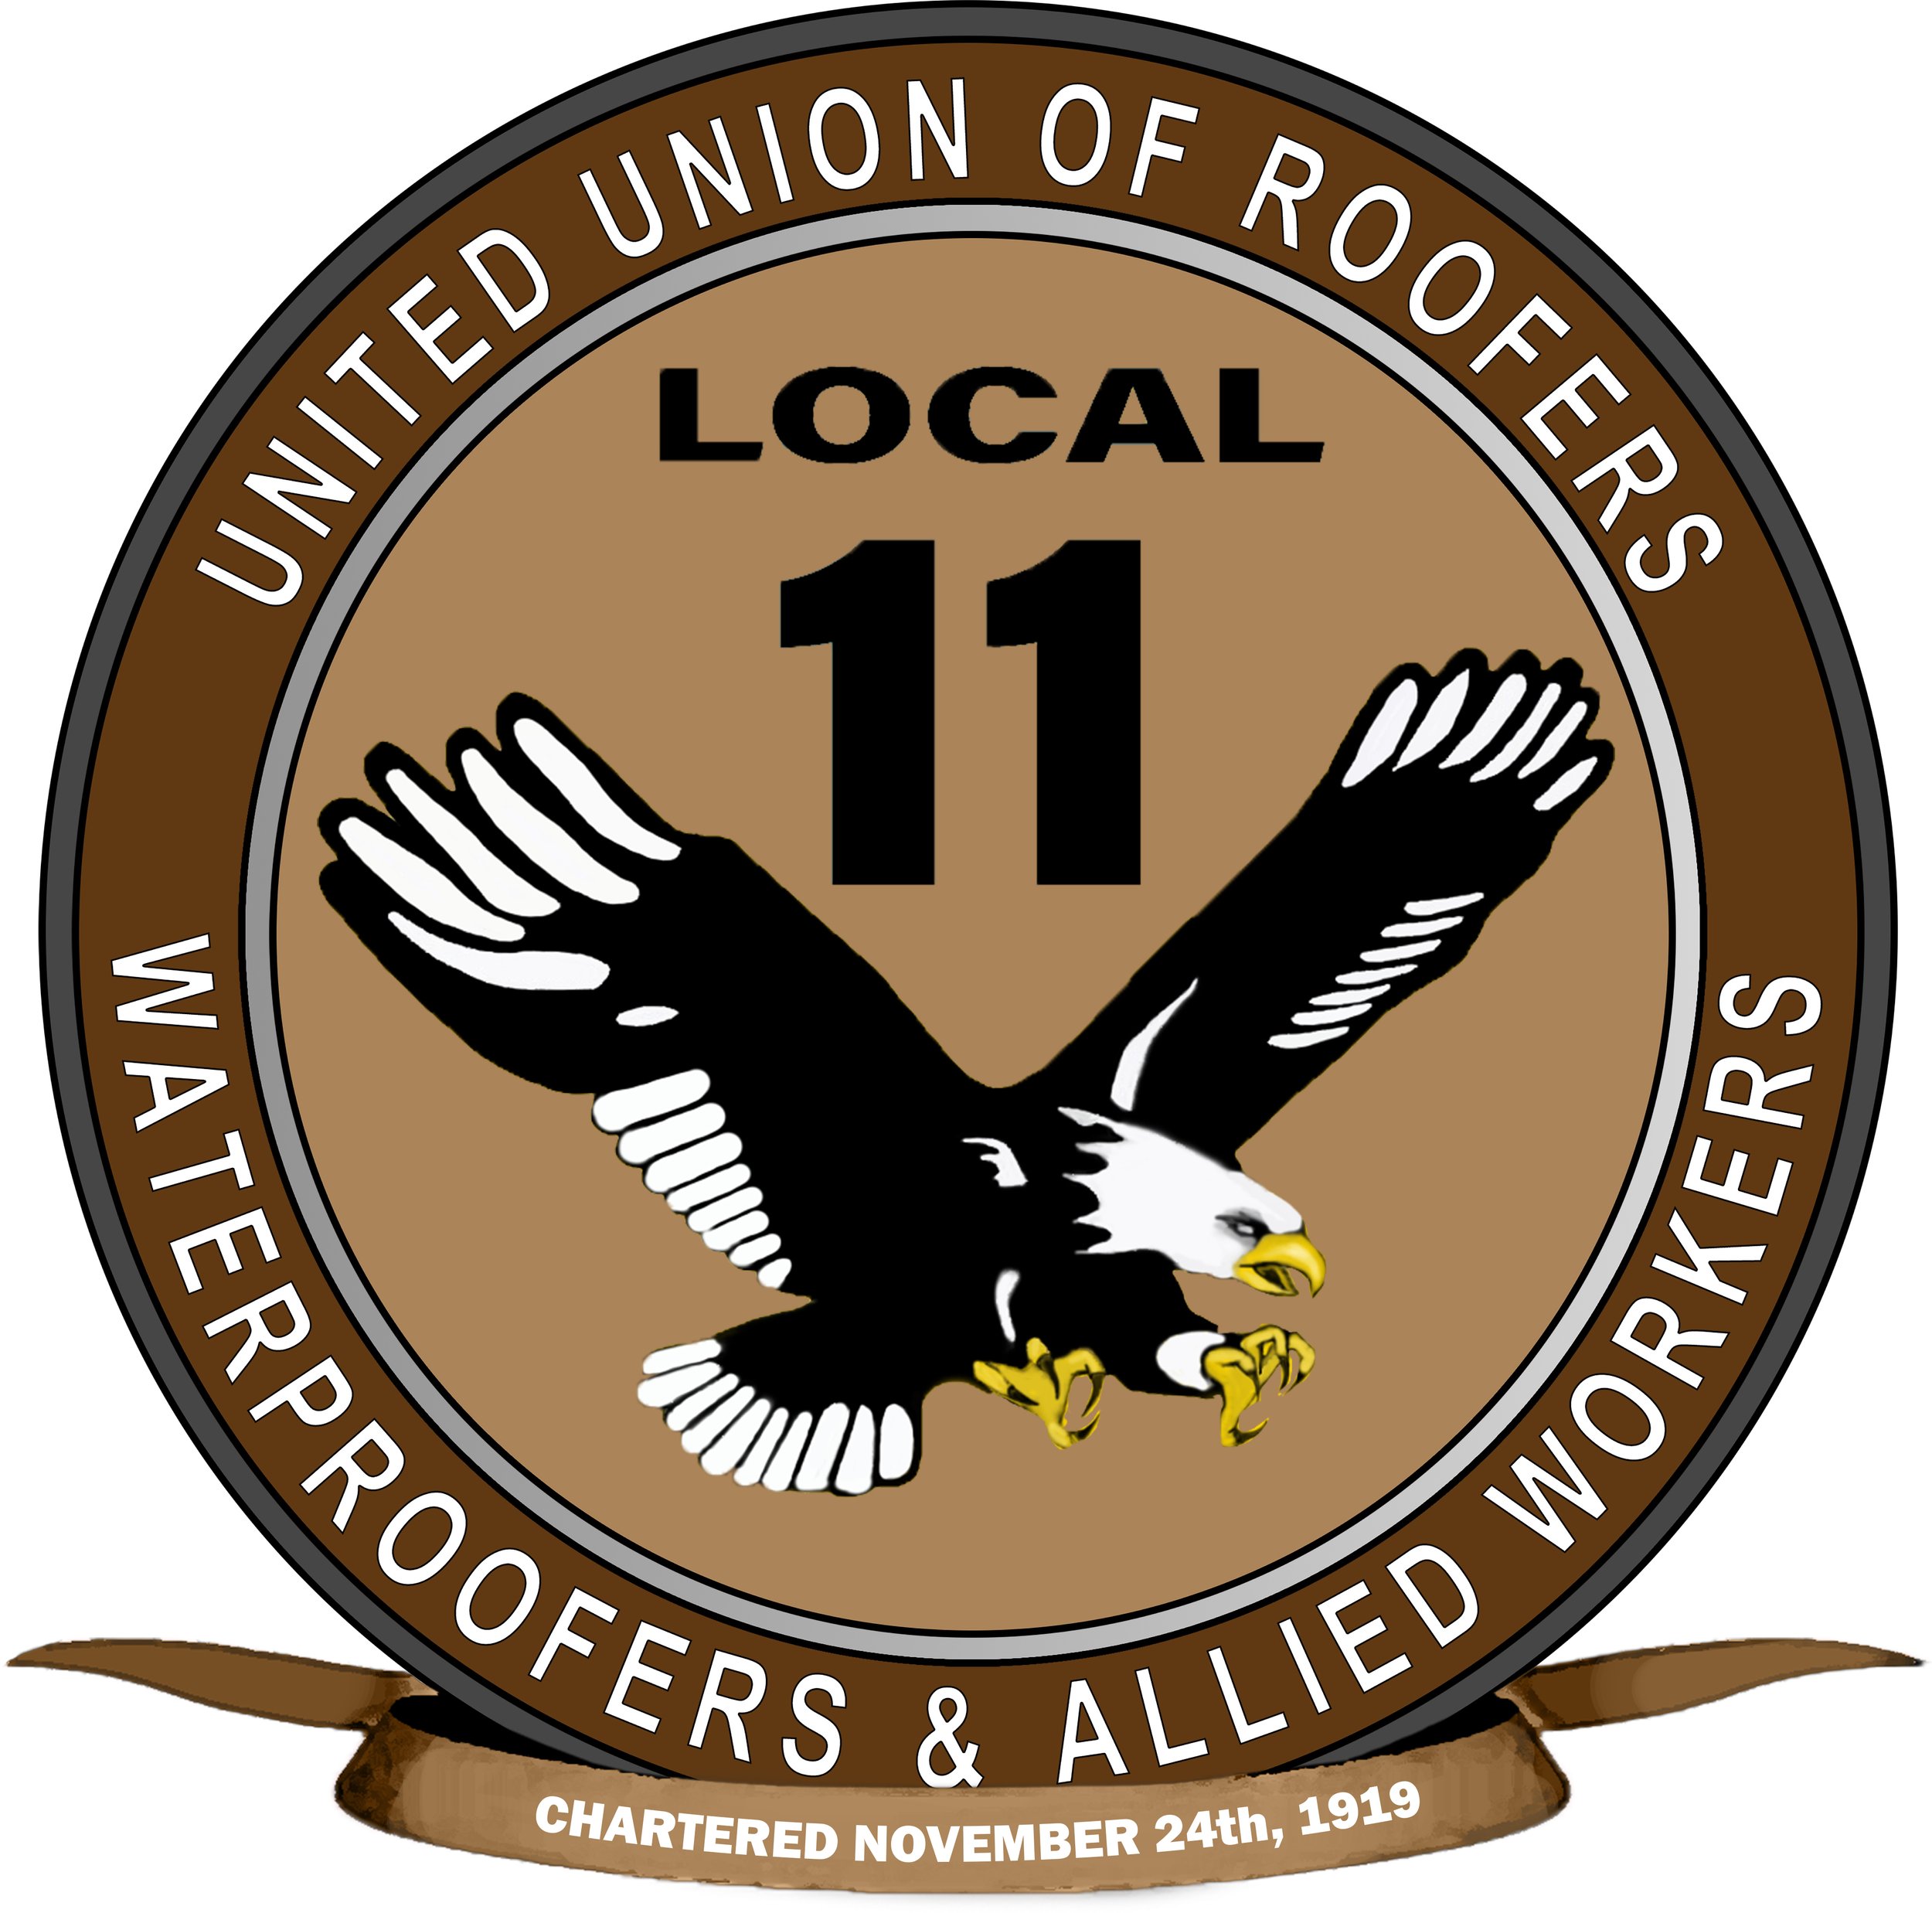 Roofers Local #11.jpg